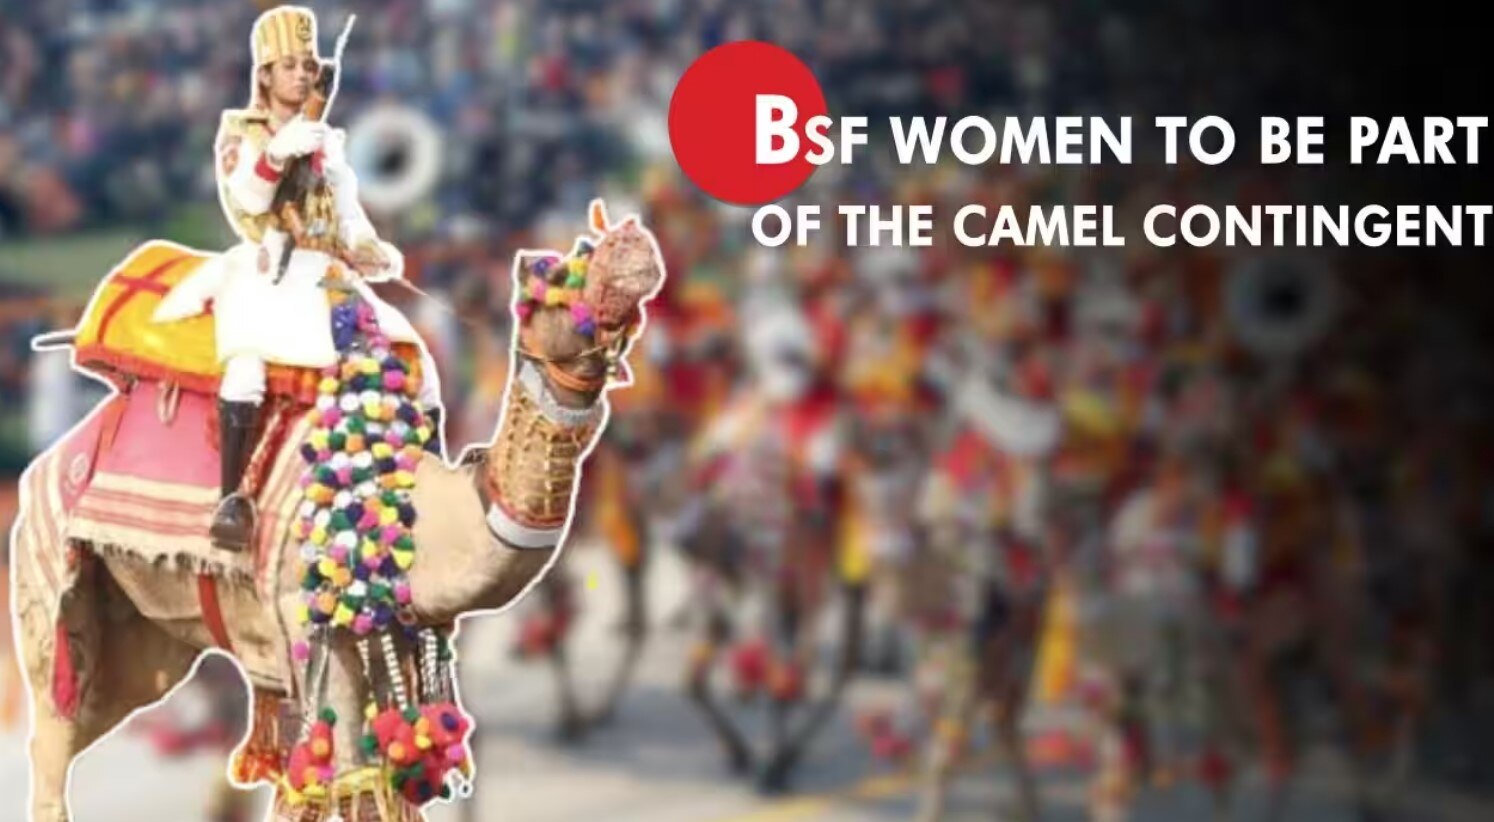 Republic Day 2023 BSF's women's camel riding contingent participated in the parade for the first time